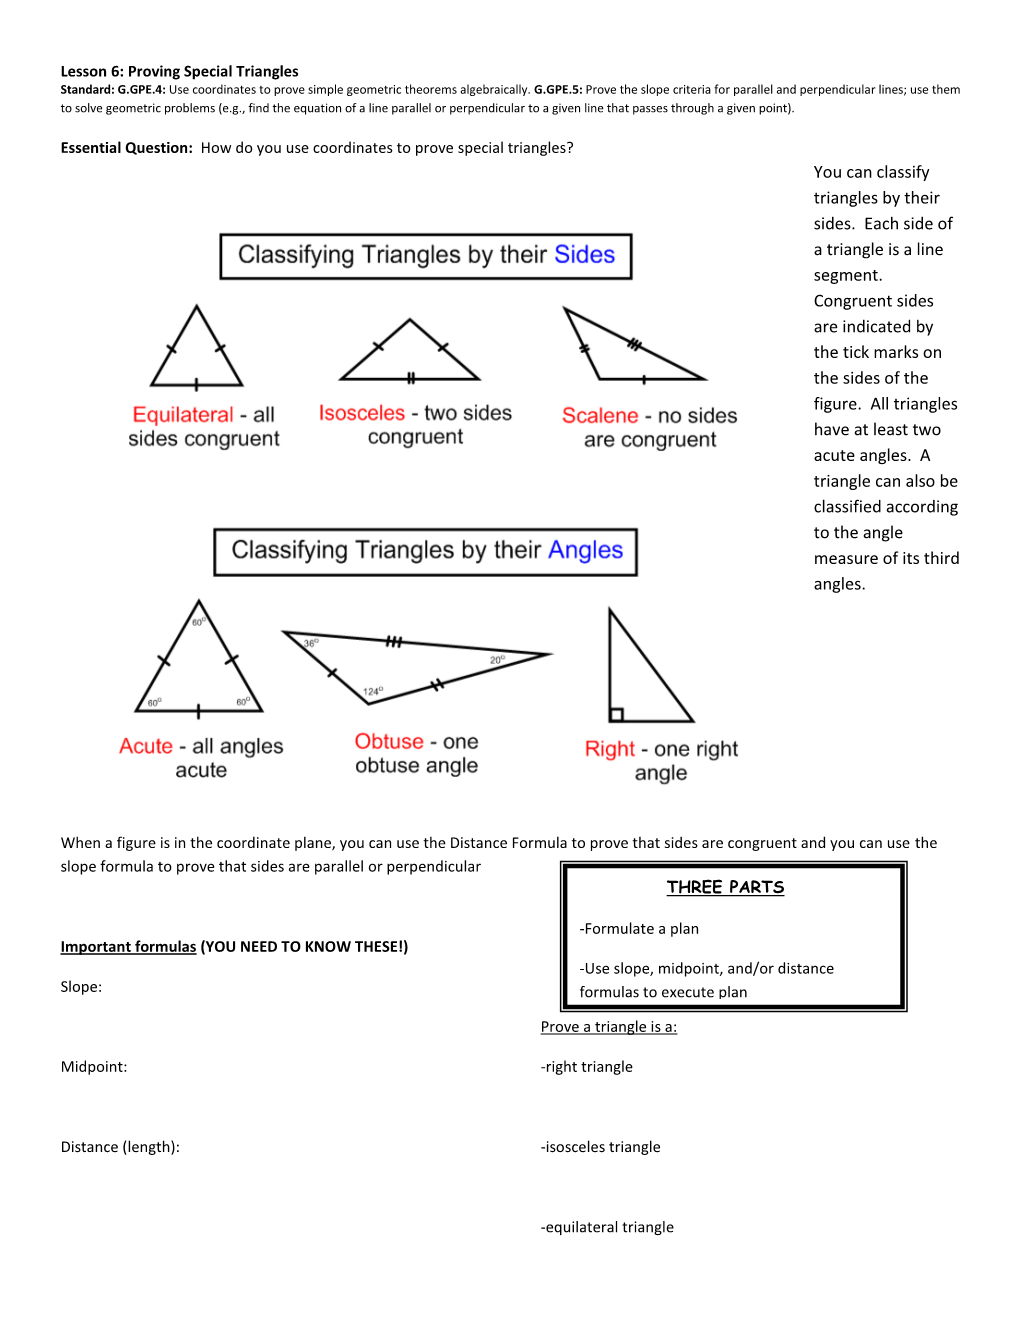 Classify Triangles By Their Sides Docslib